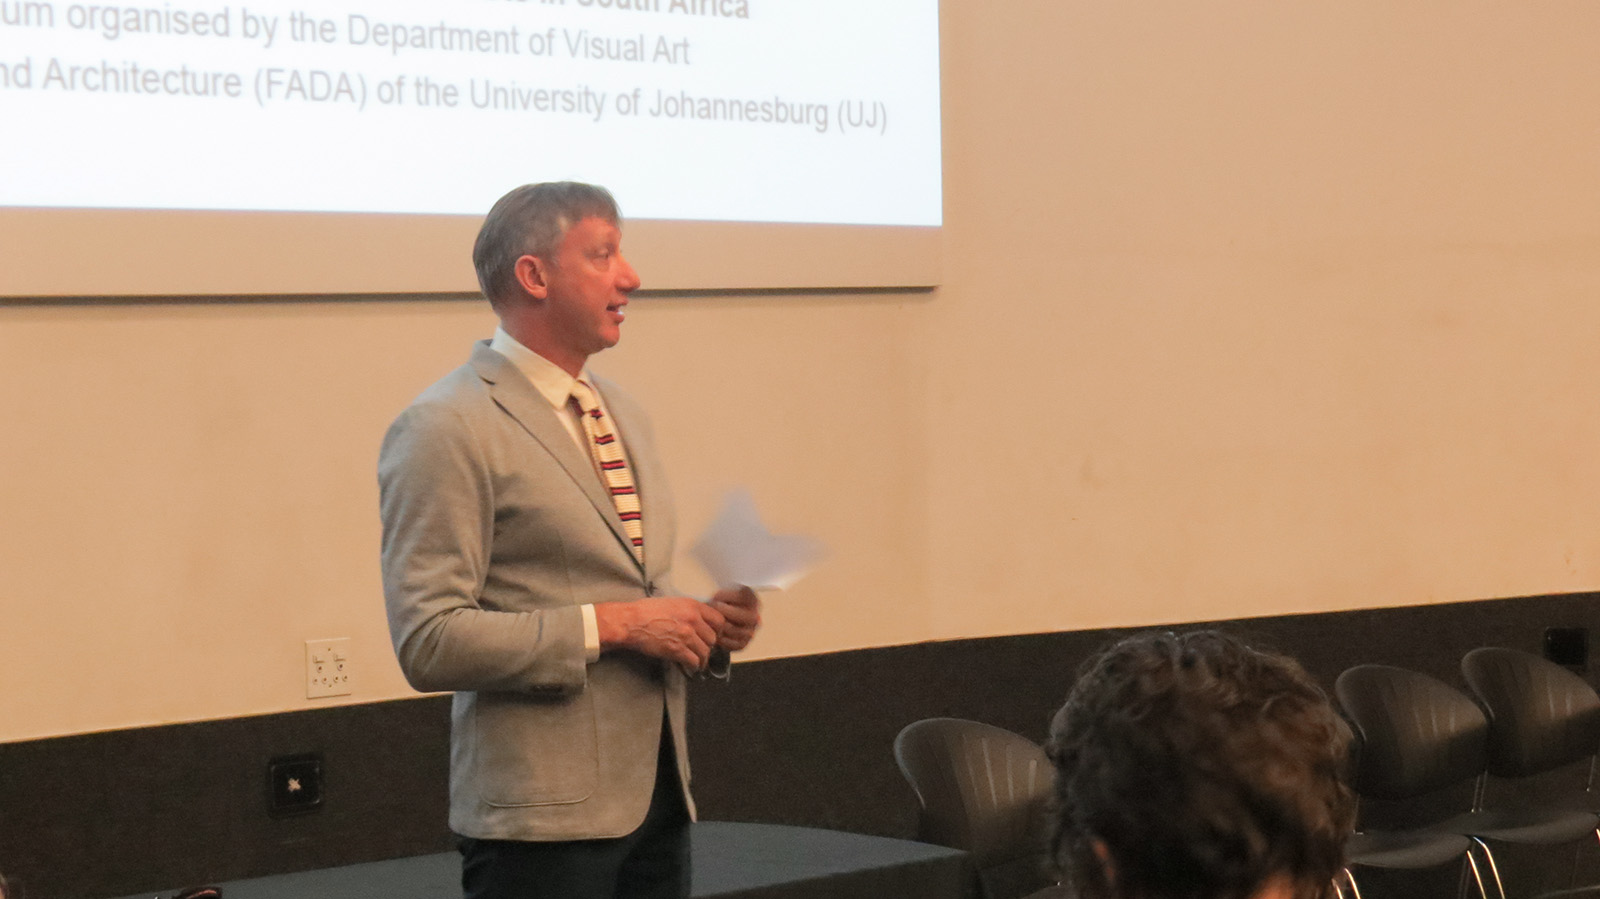 Click the image for a view of: Dean of FADA, Prof. Federico Freschi opens the Booknesses Colloquium. Friday 24 March